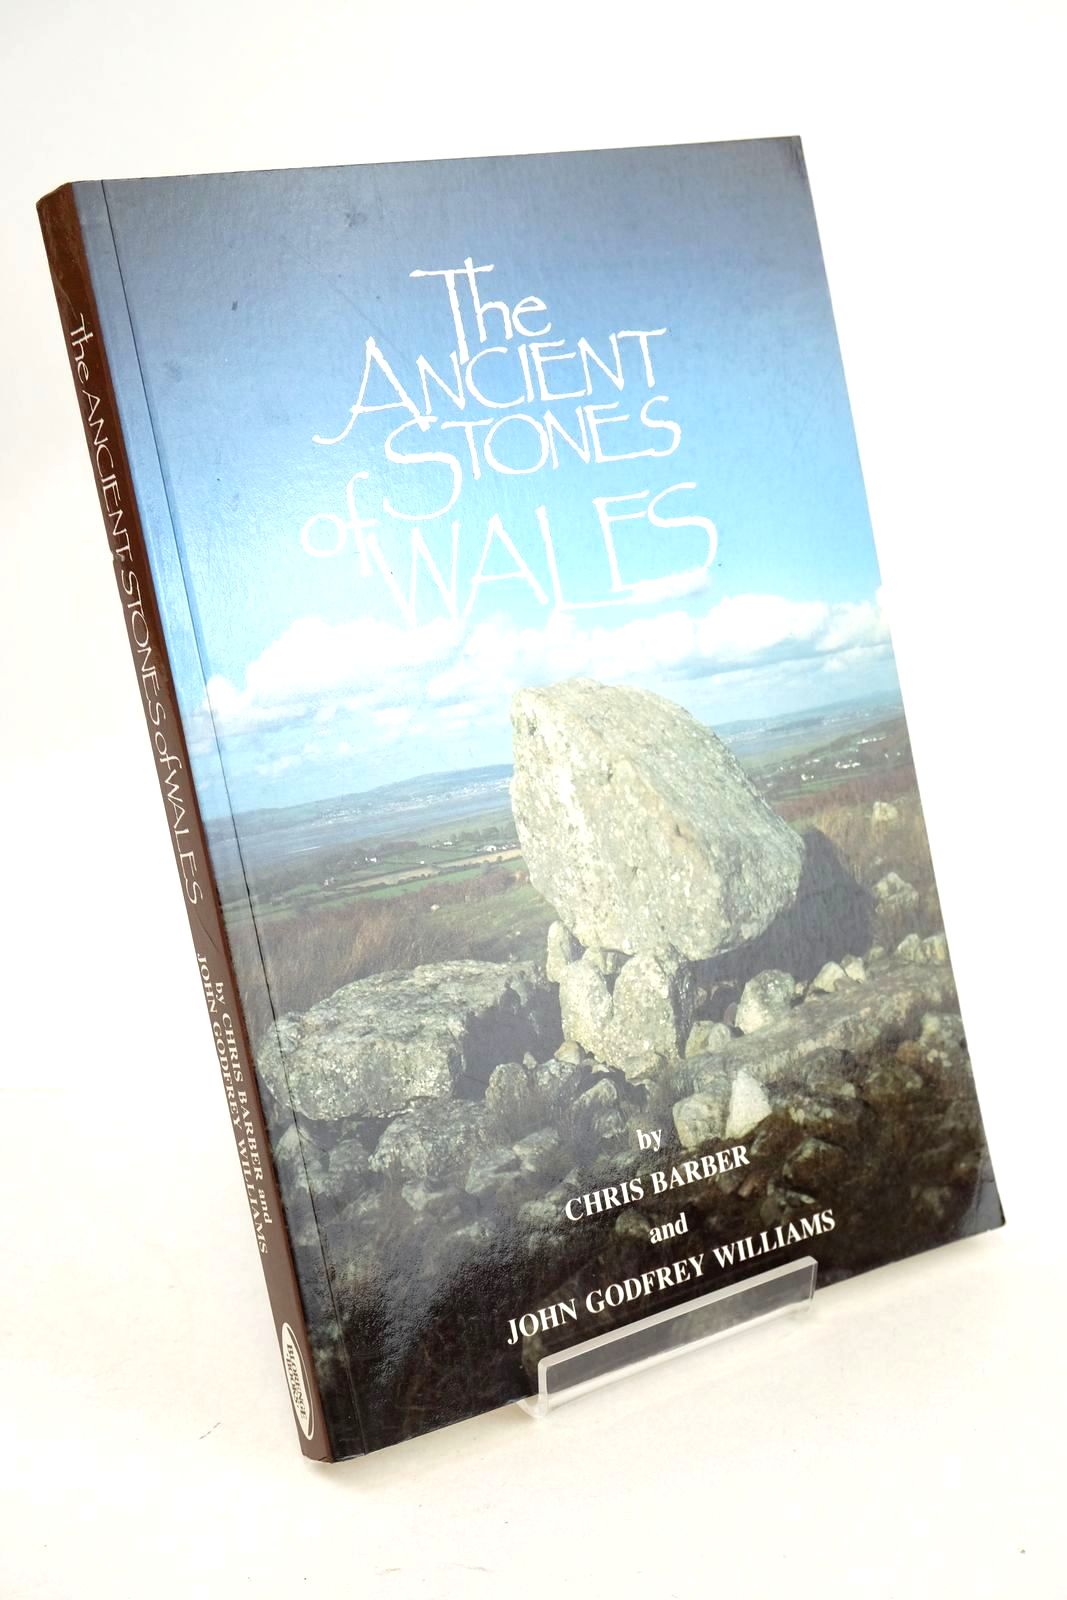 Photo of THE ANCIENT STONES OF WALES written by Barber, Chris Williams, John G. published by Blorenge Books (STOCK CODE: 1327165)  for sale by Stella & Rose's Books